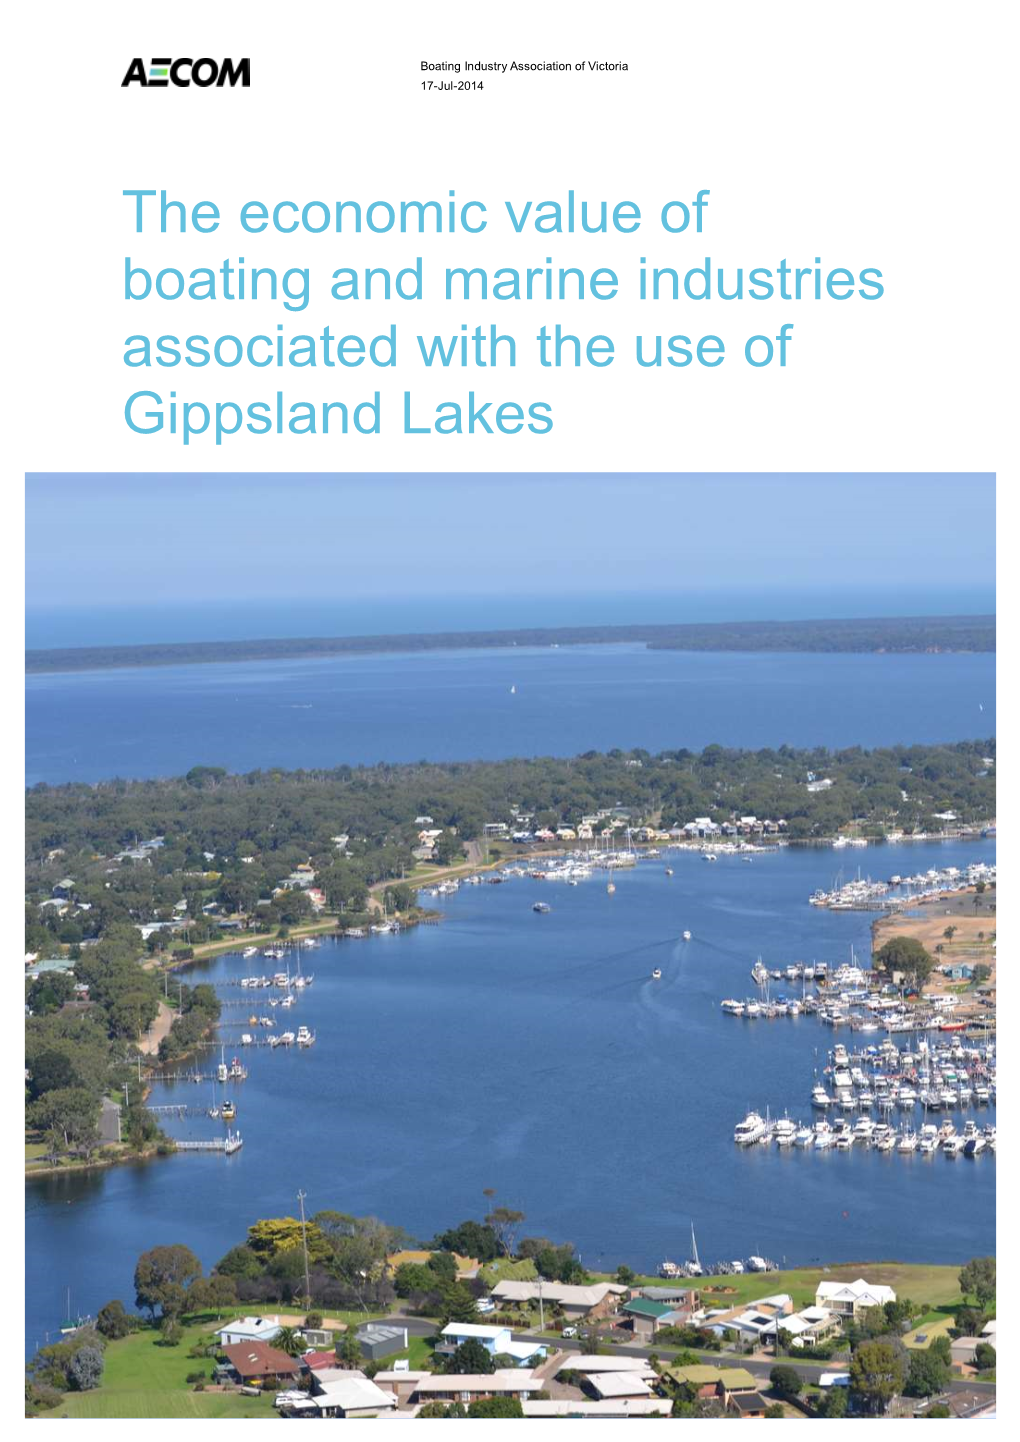 The Economic Value of Boating and Marine Industries Associated with the Use of Gippsland Lakes